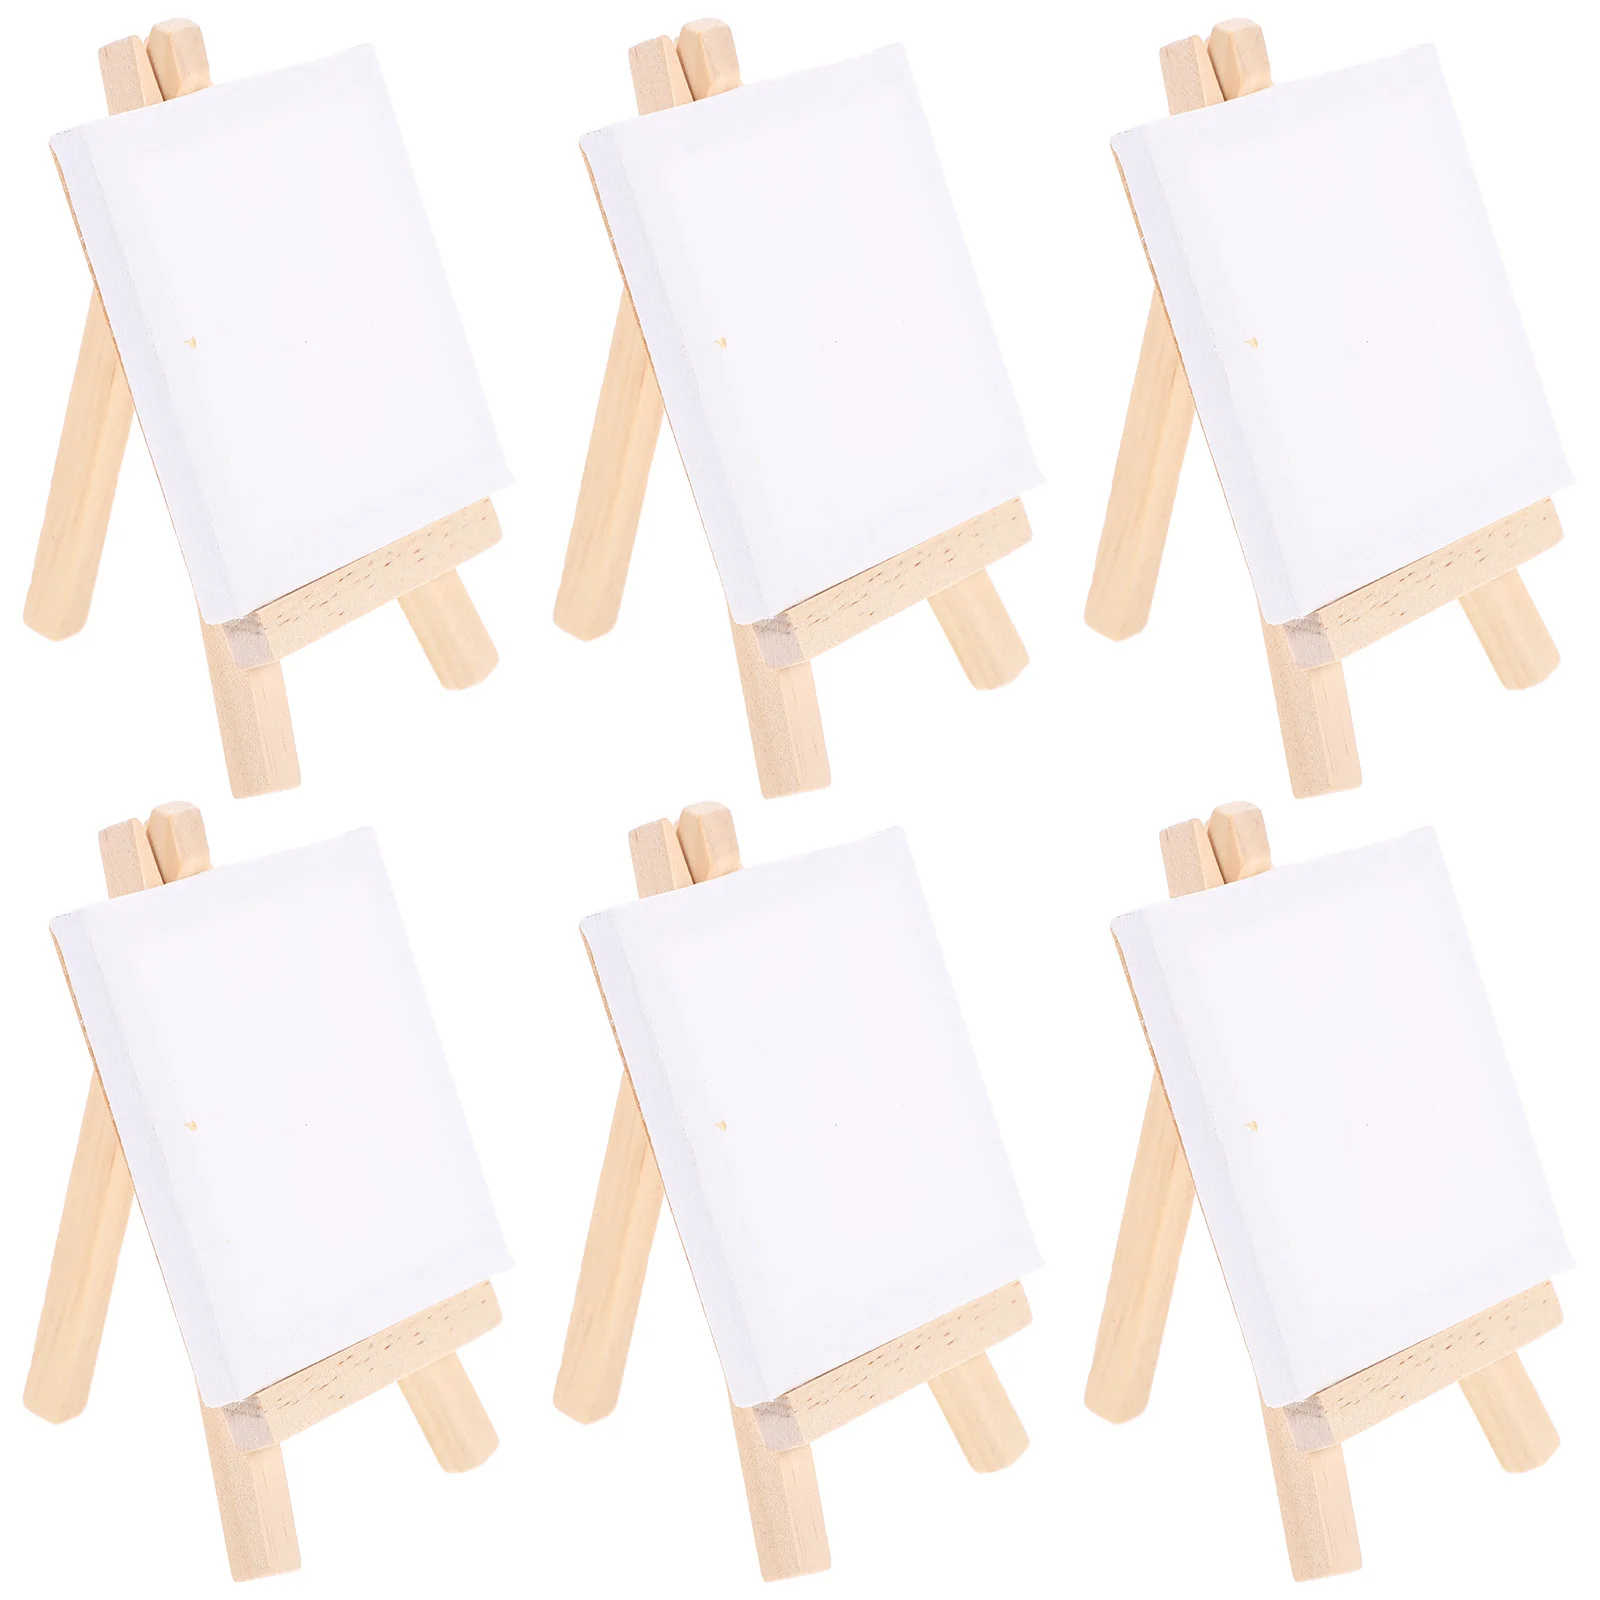 6/12 Sets of White Paint Stretched Artist Canvas Board White Blank Boards Wooden Oil Paint Artwork painting Board(White)